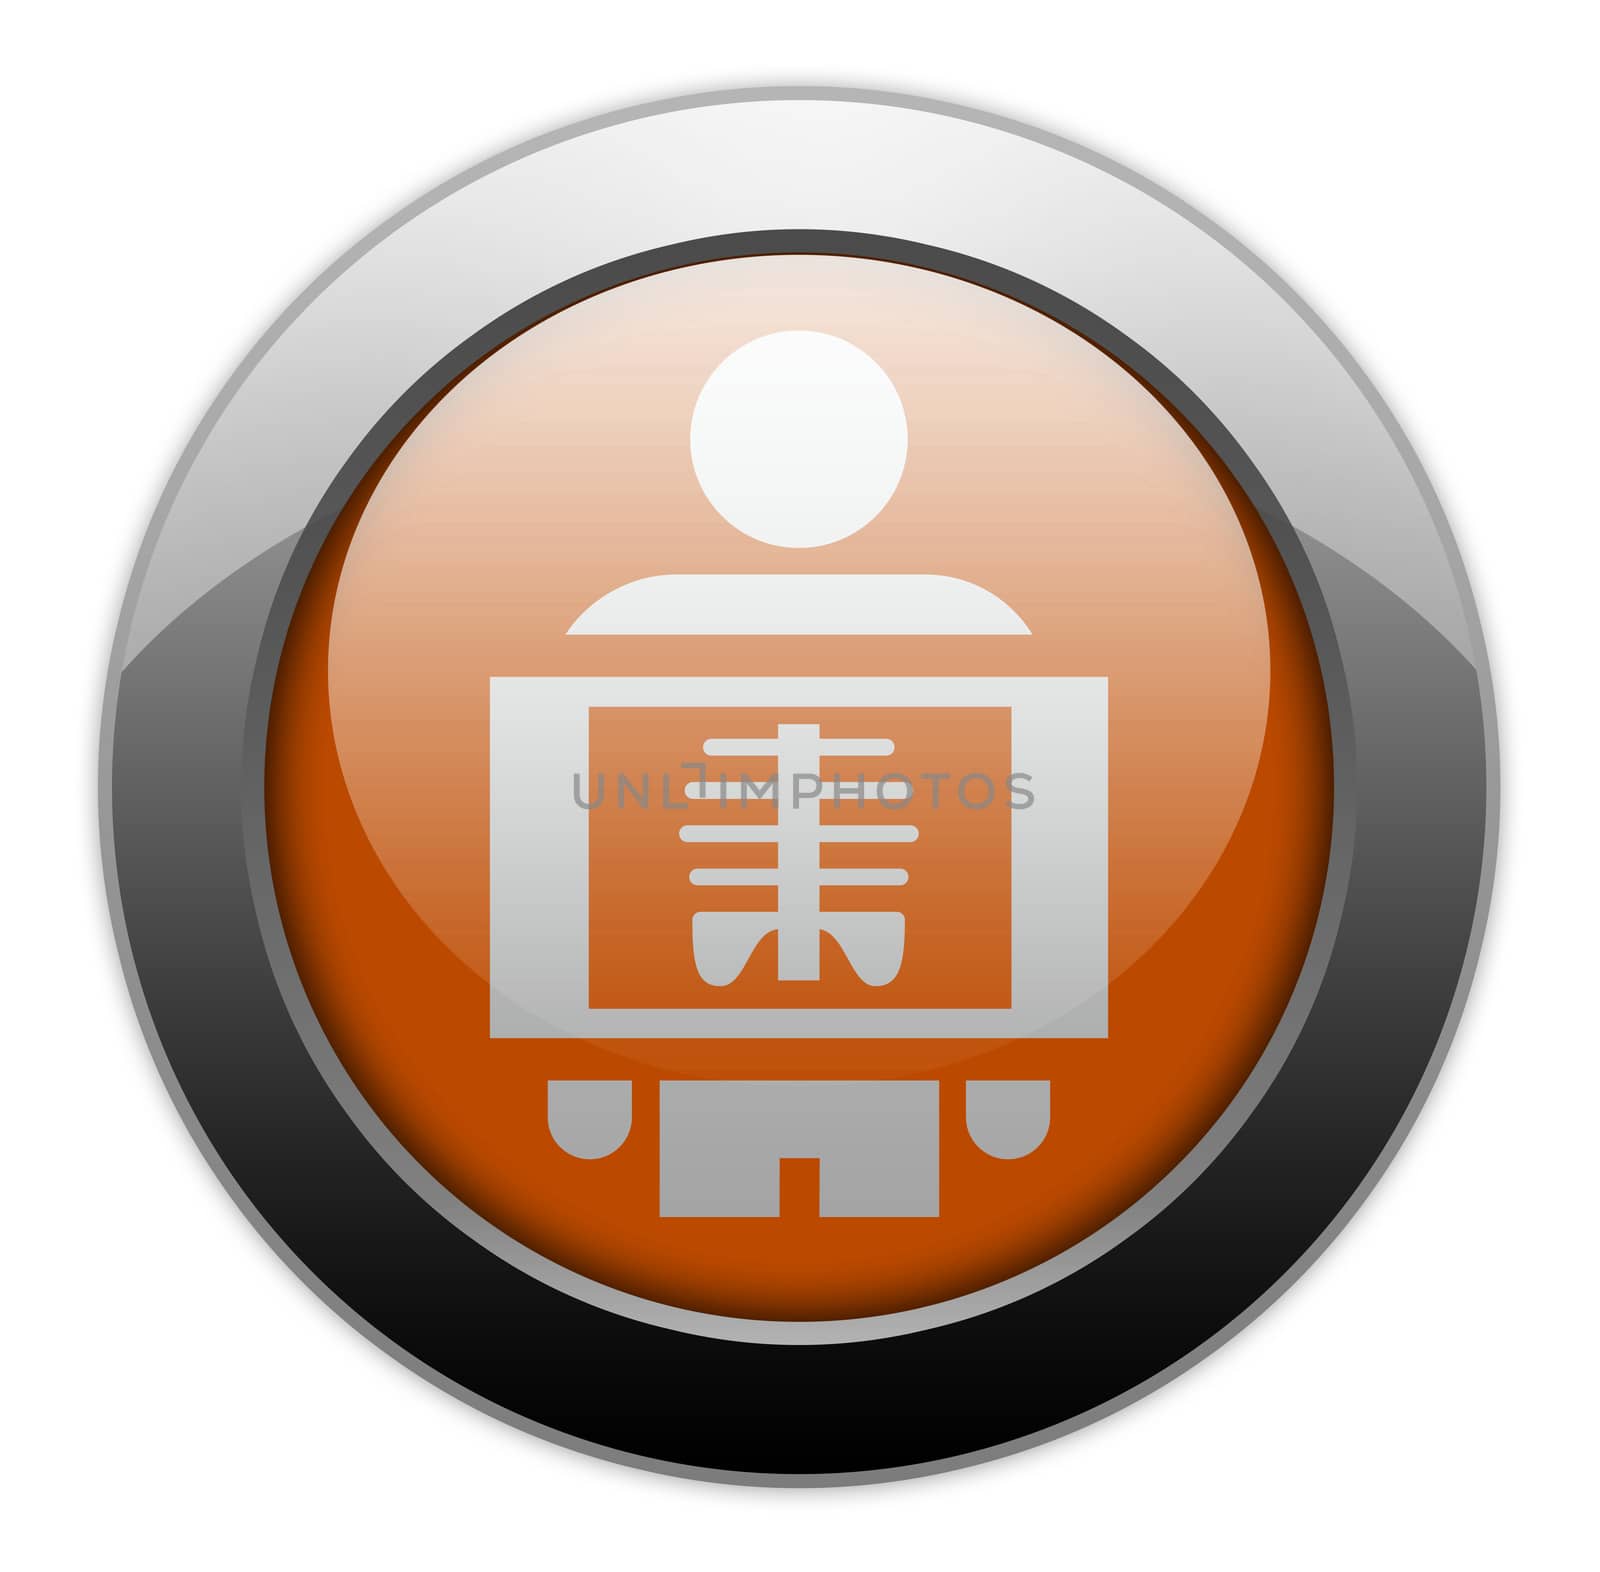 Icon, Button, Pictogram X-Ray by mindscanner